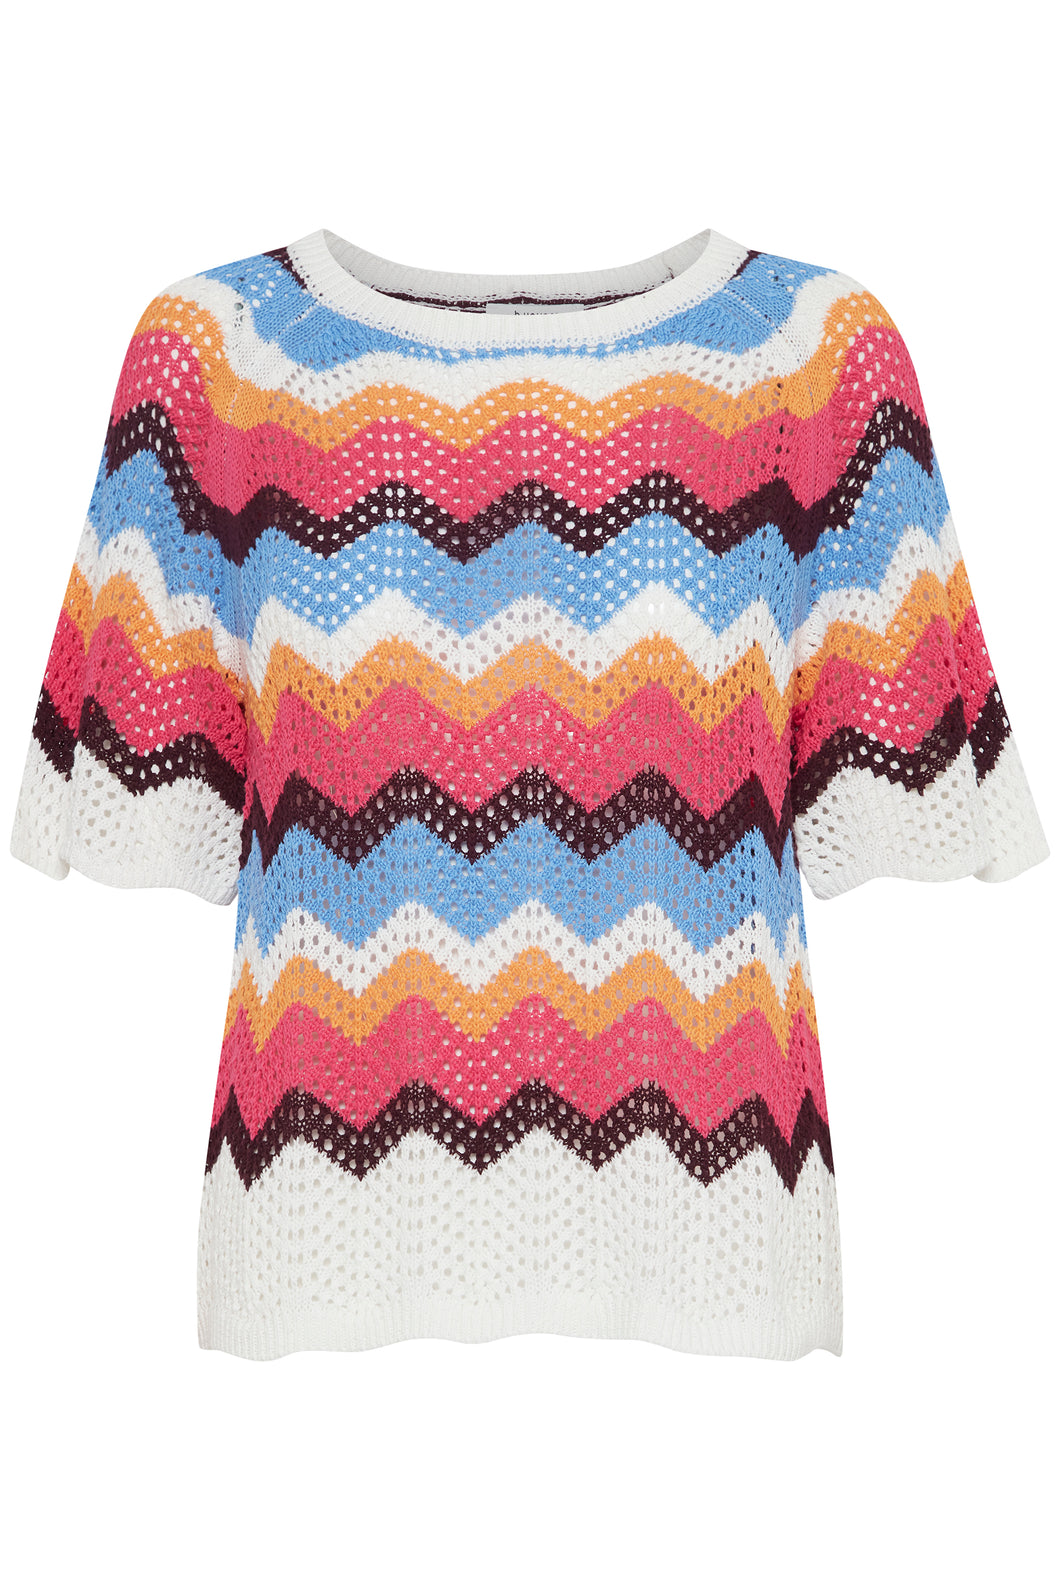 Byoung Bymiriam Jumper in Marshmallow mix